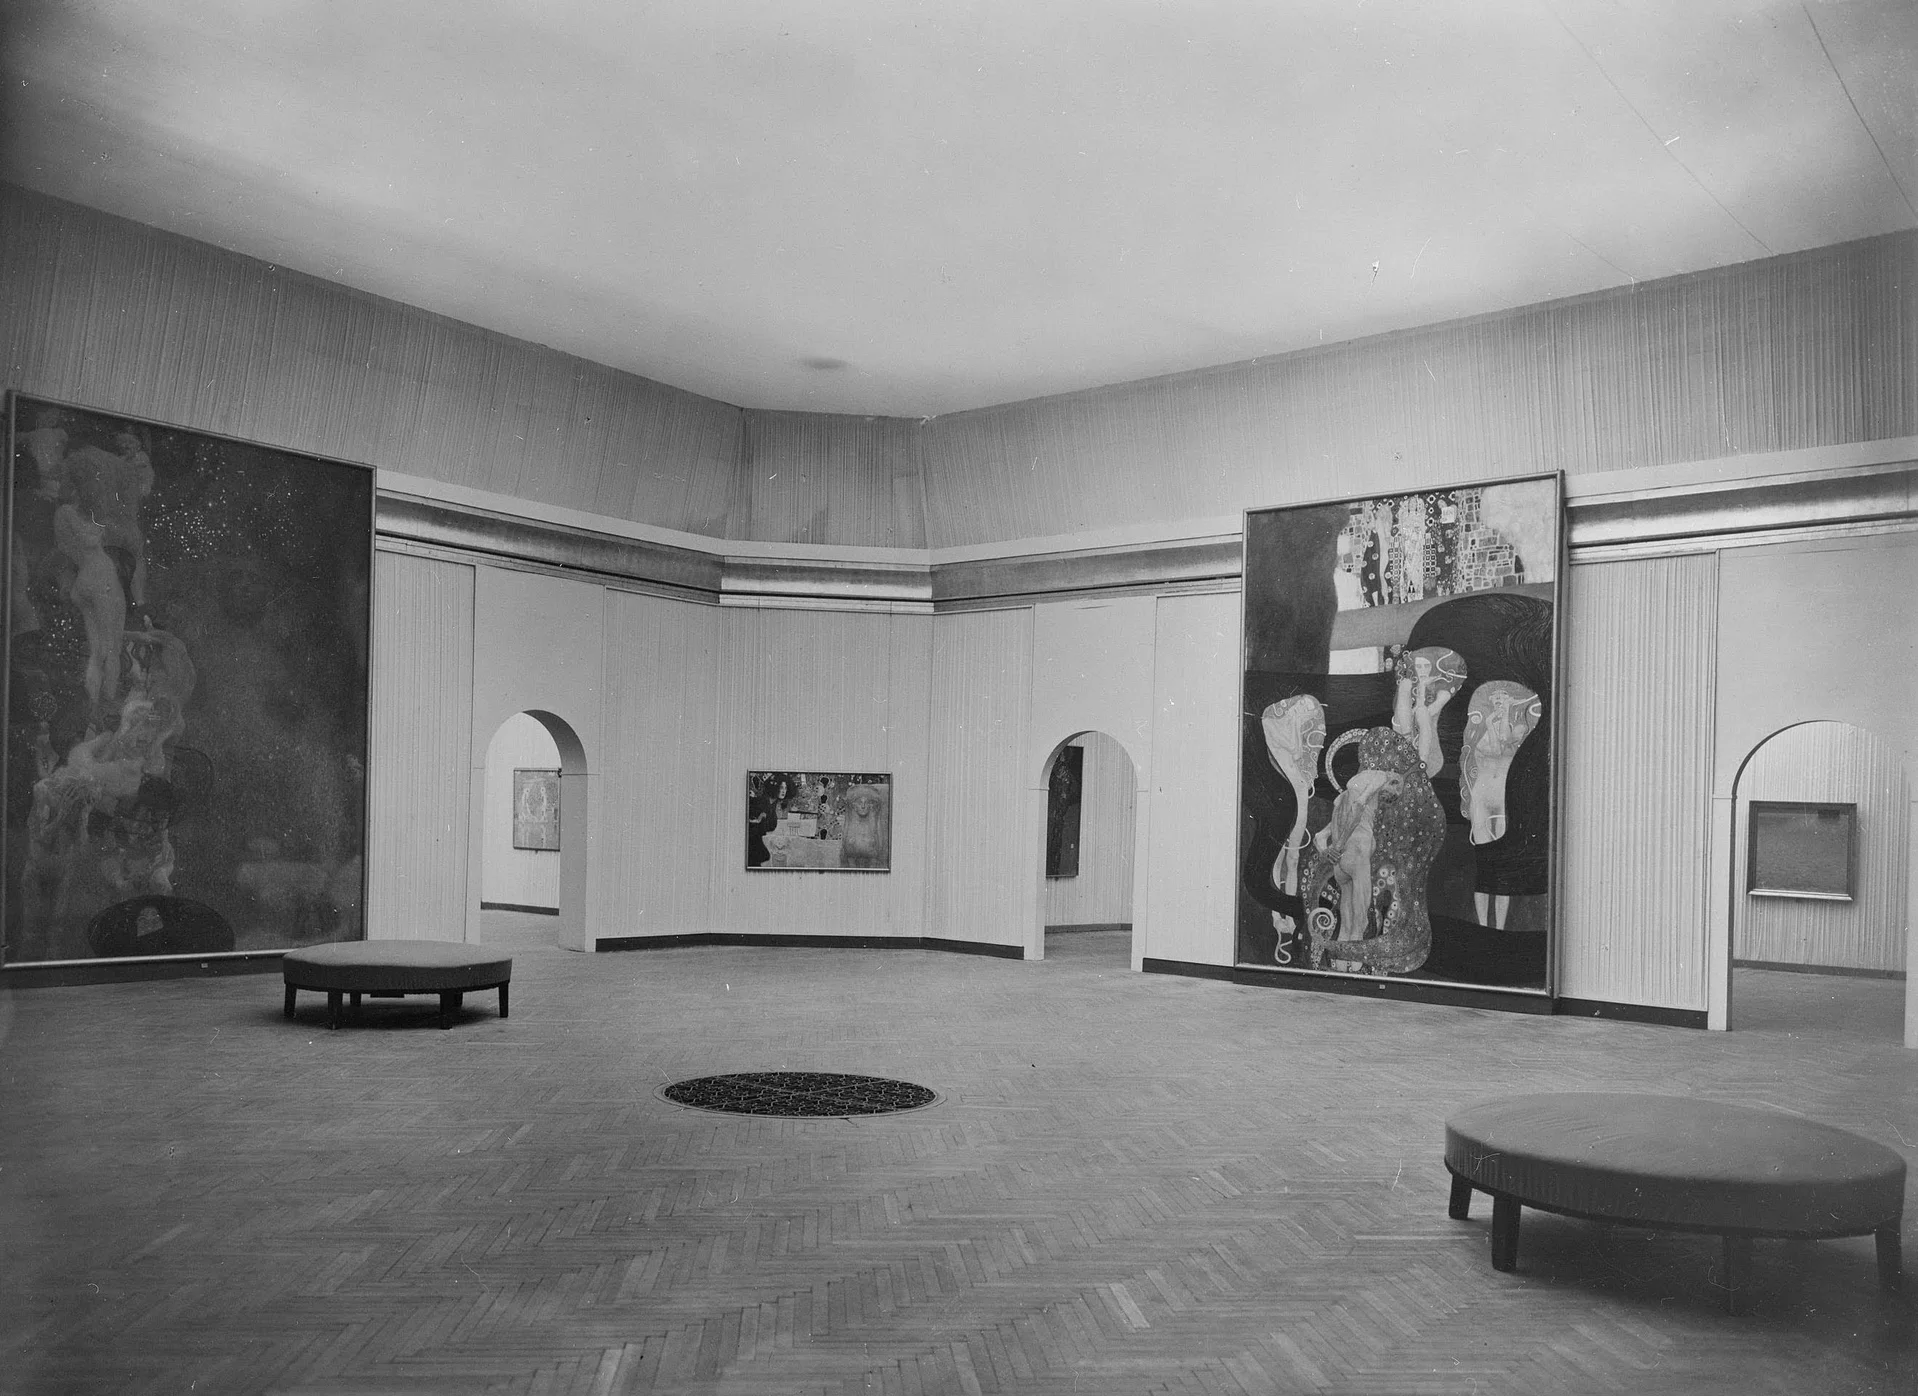 A black-and-white photograph from 1928 showing the original Faculty Paintings at the 99th Vienna Secession exhibition.